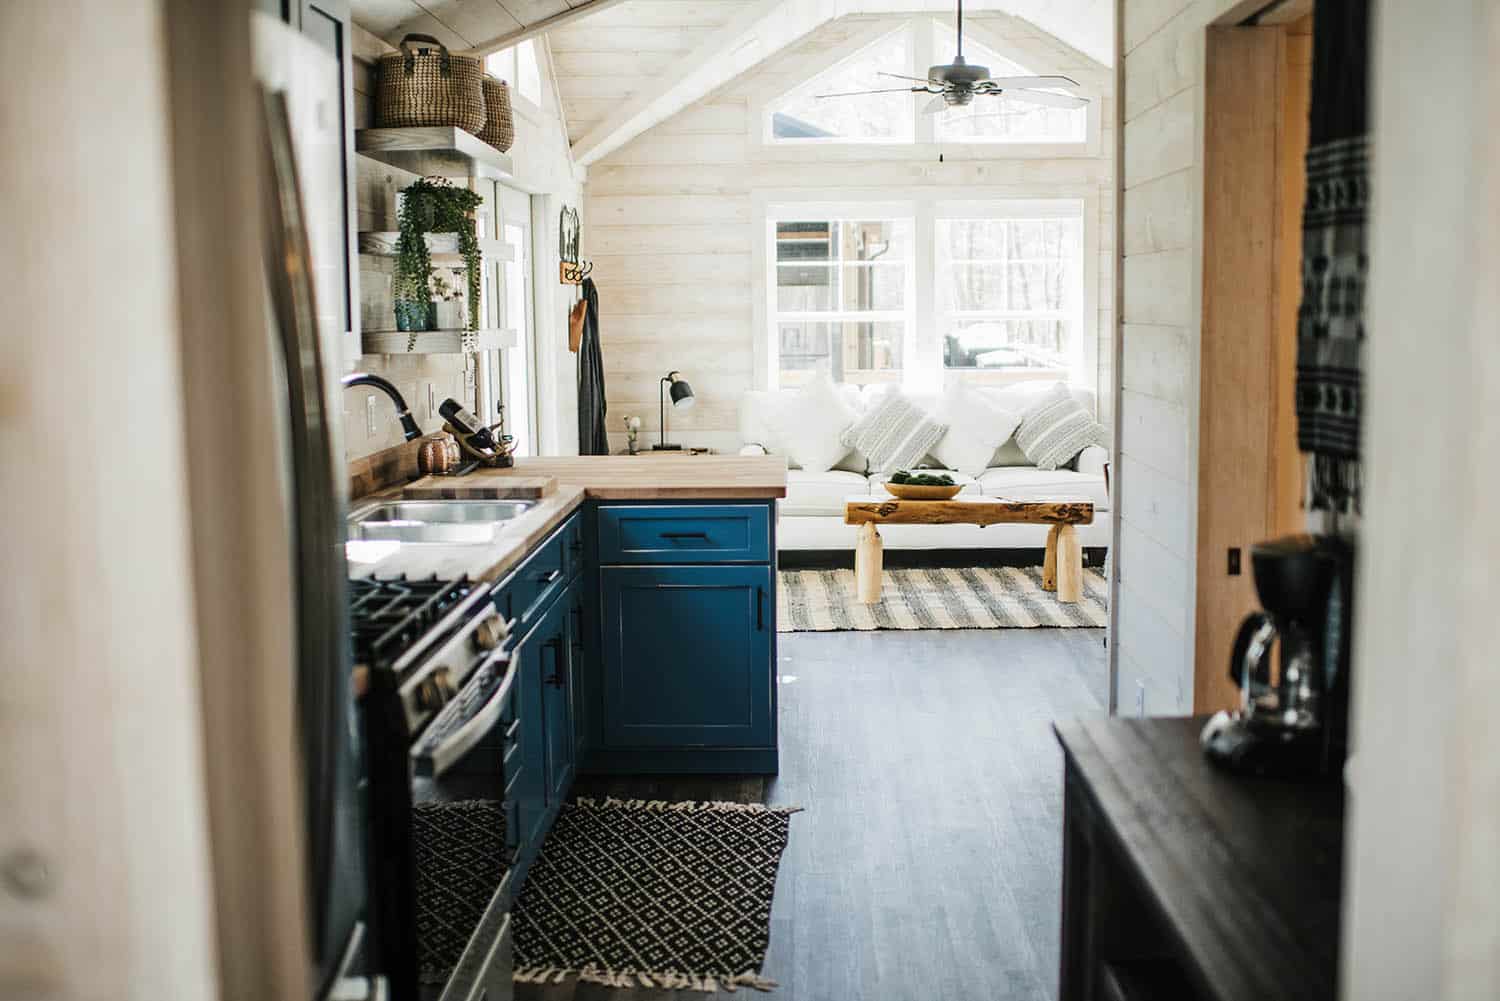 connected kitchen and living space layout in prefab cabin